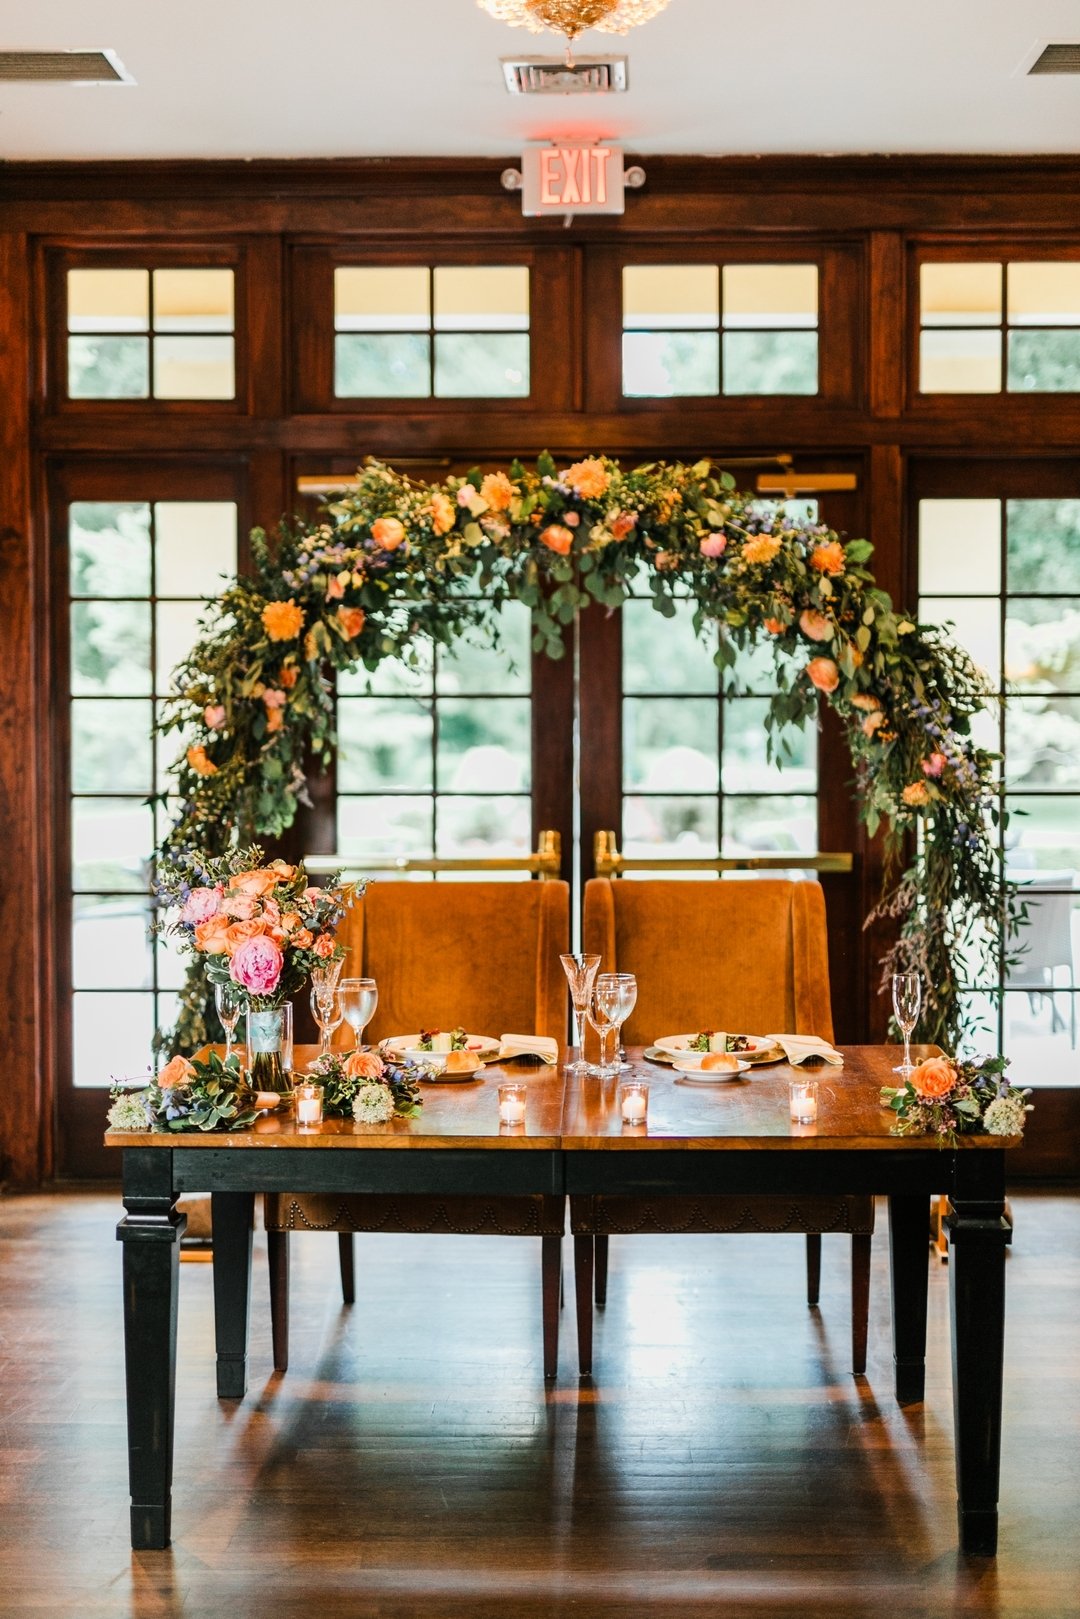 May is here and has us reminiscing about Sarah + Jon's gorgeous sweetheart table set up - it is giving us all the bright spring time vibes we could ask for! 

Love is in full bloom, wedding season is officially in full swing and we truly can't wait t